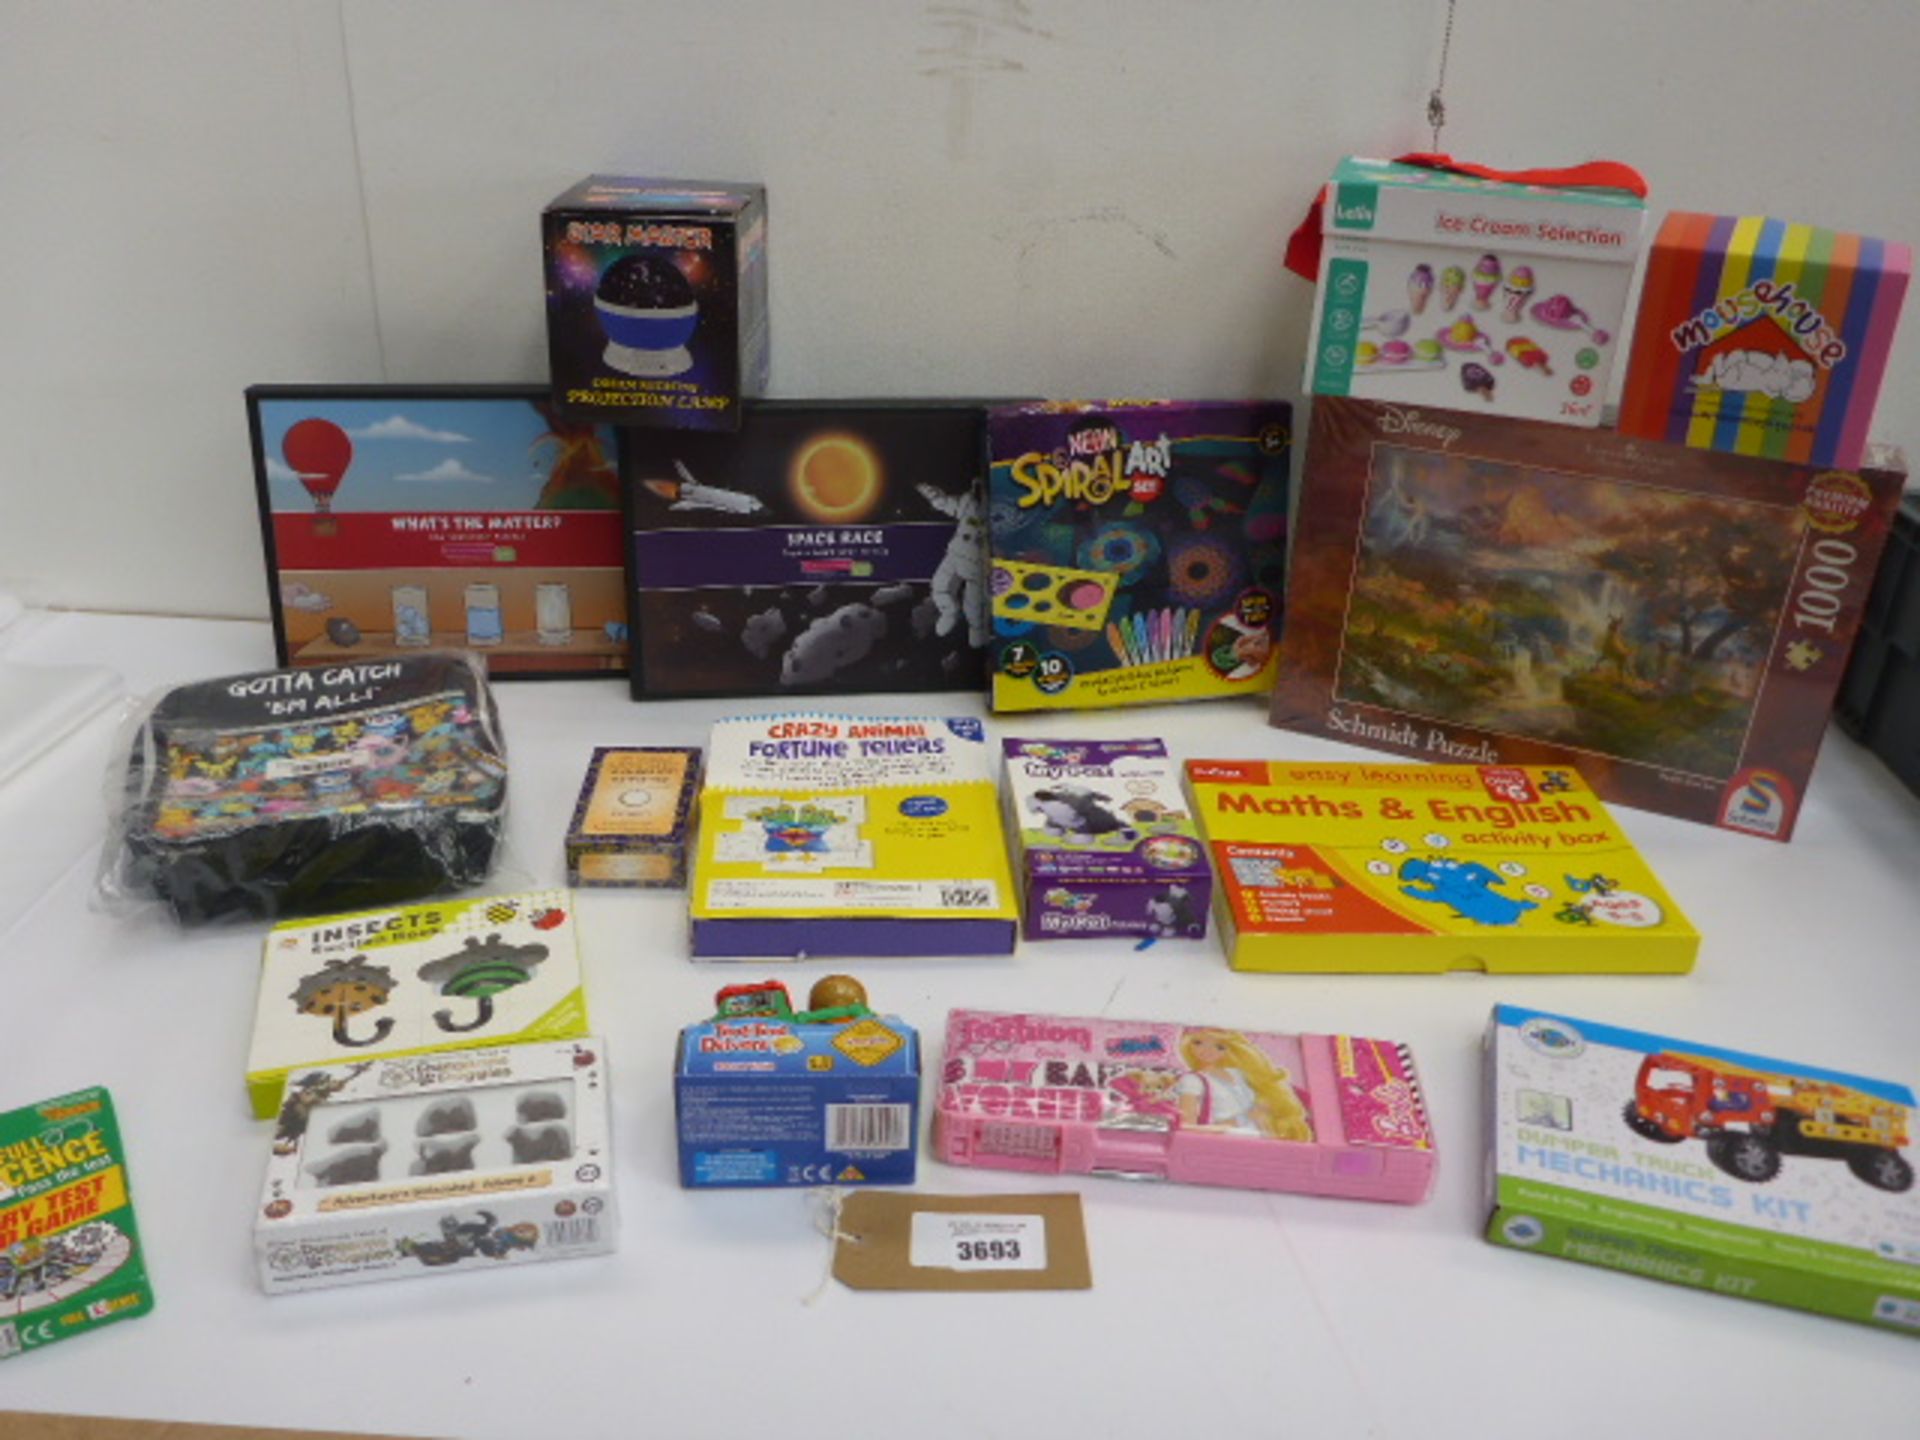 Large bag of toys & games including Space Race, What the Matter?, Jigsaw, Activity Box, card games